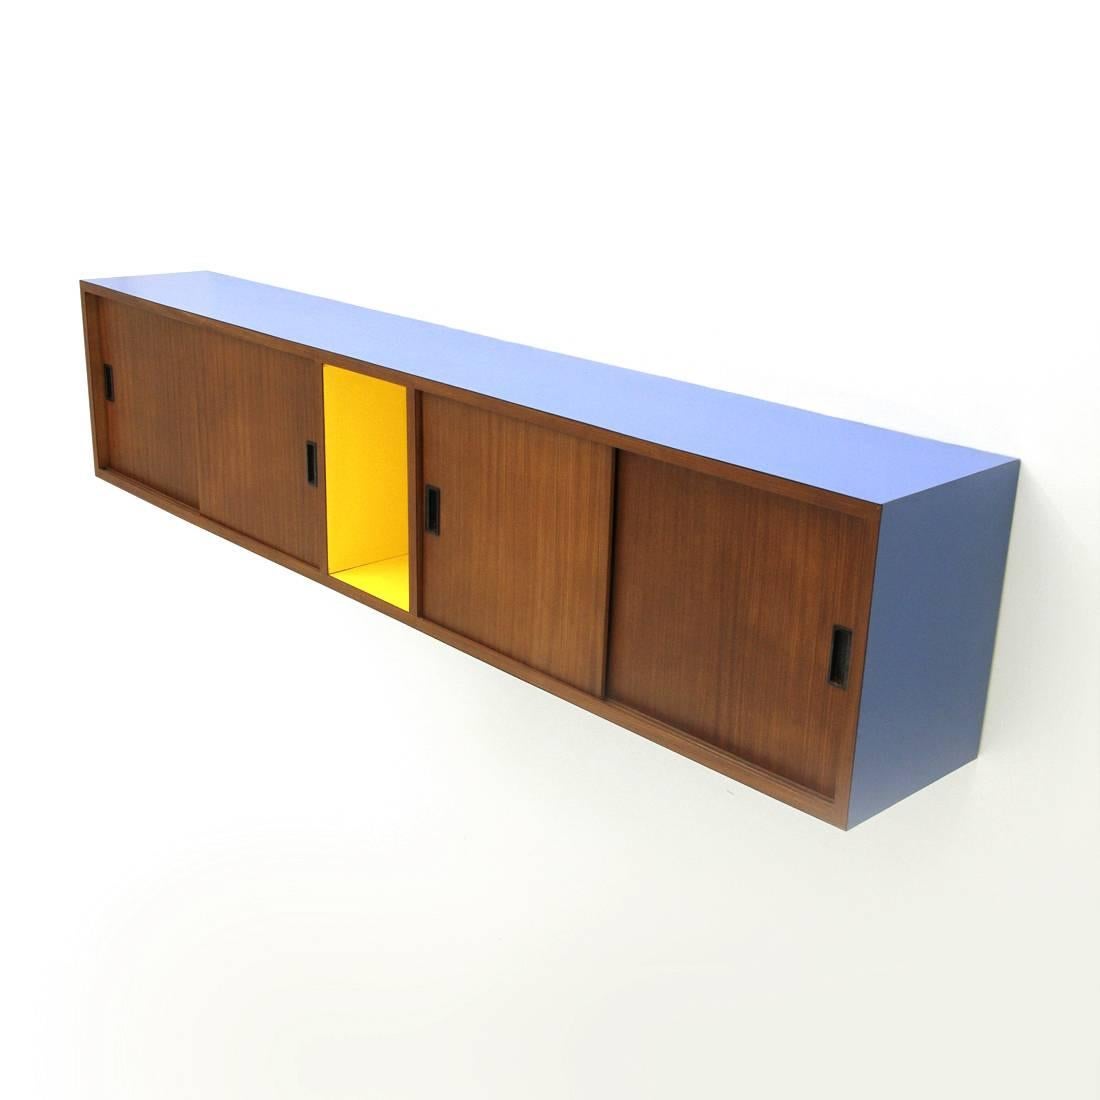 1960s Italian production sideboard.
Wooden structure, teak veneered and blue and yellow colored Formica.
Handles in black painted metal.
Buttonholes to be attached to the wall.
Structure in good condition, some signs due to normal use over